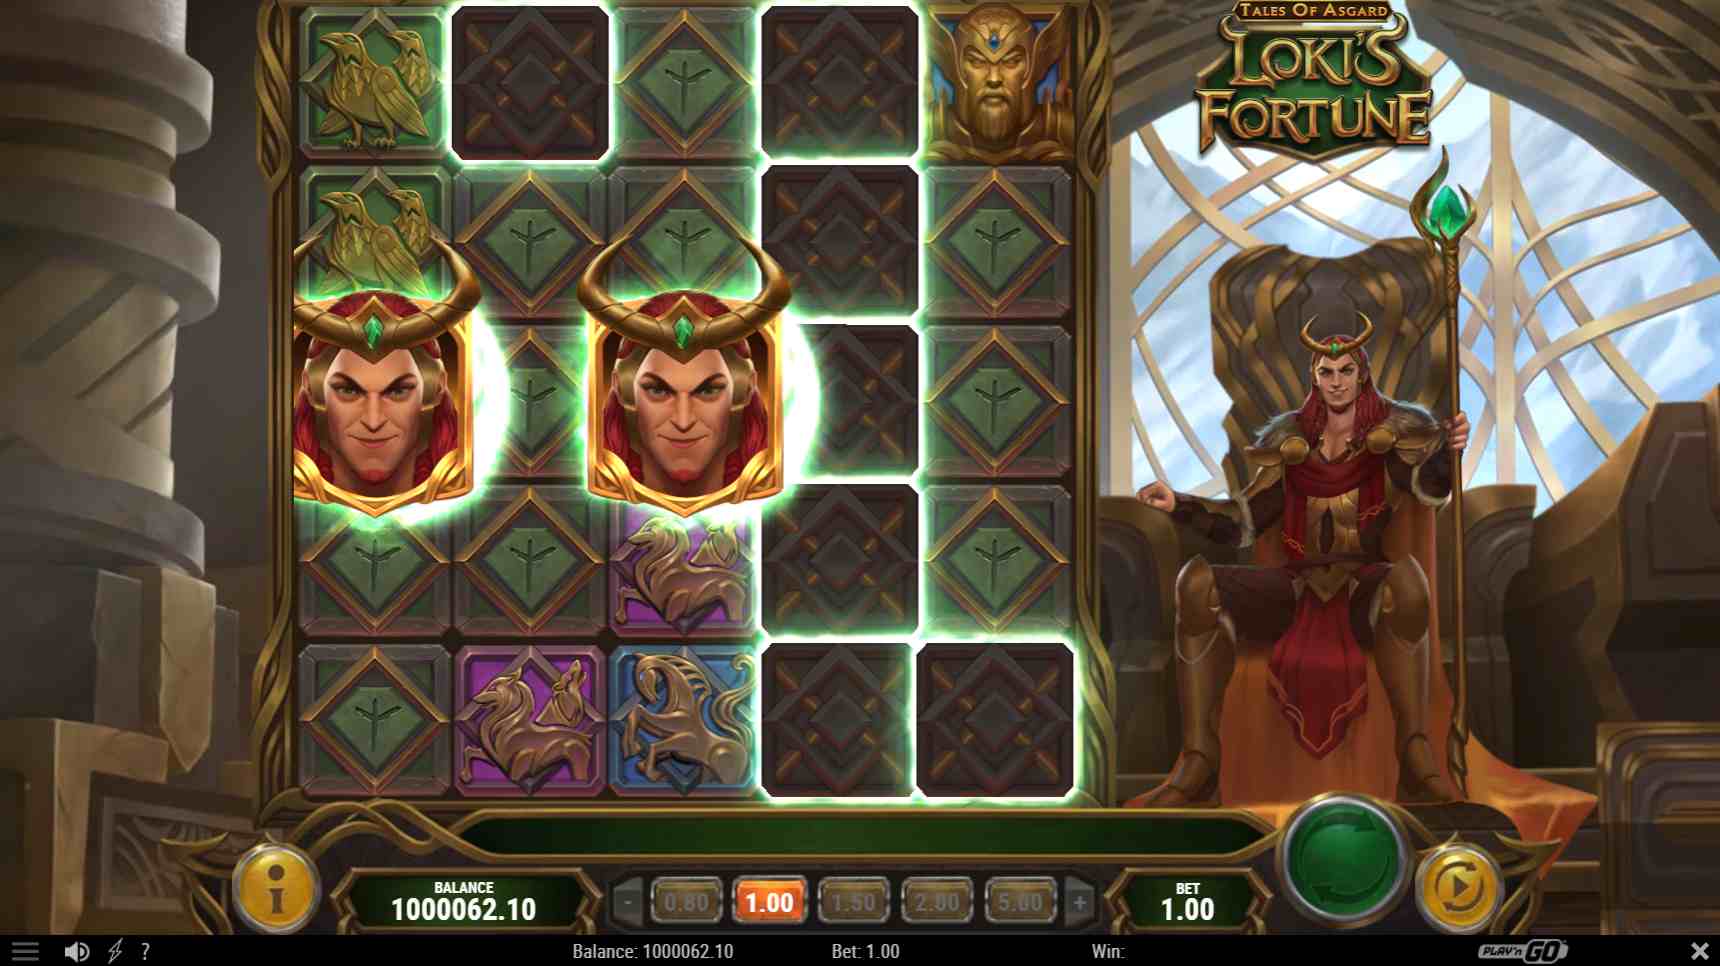 Tales of Asgard Loki's Fortune Mystery Feature